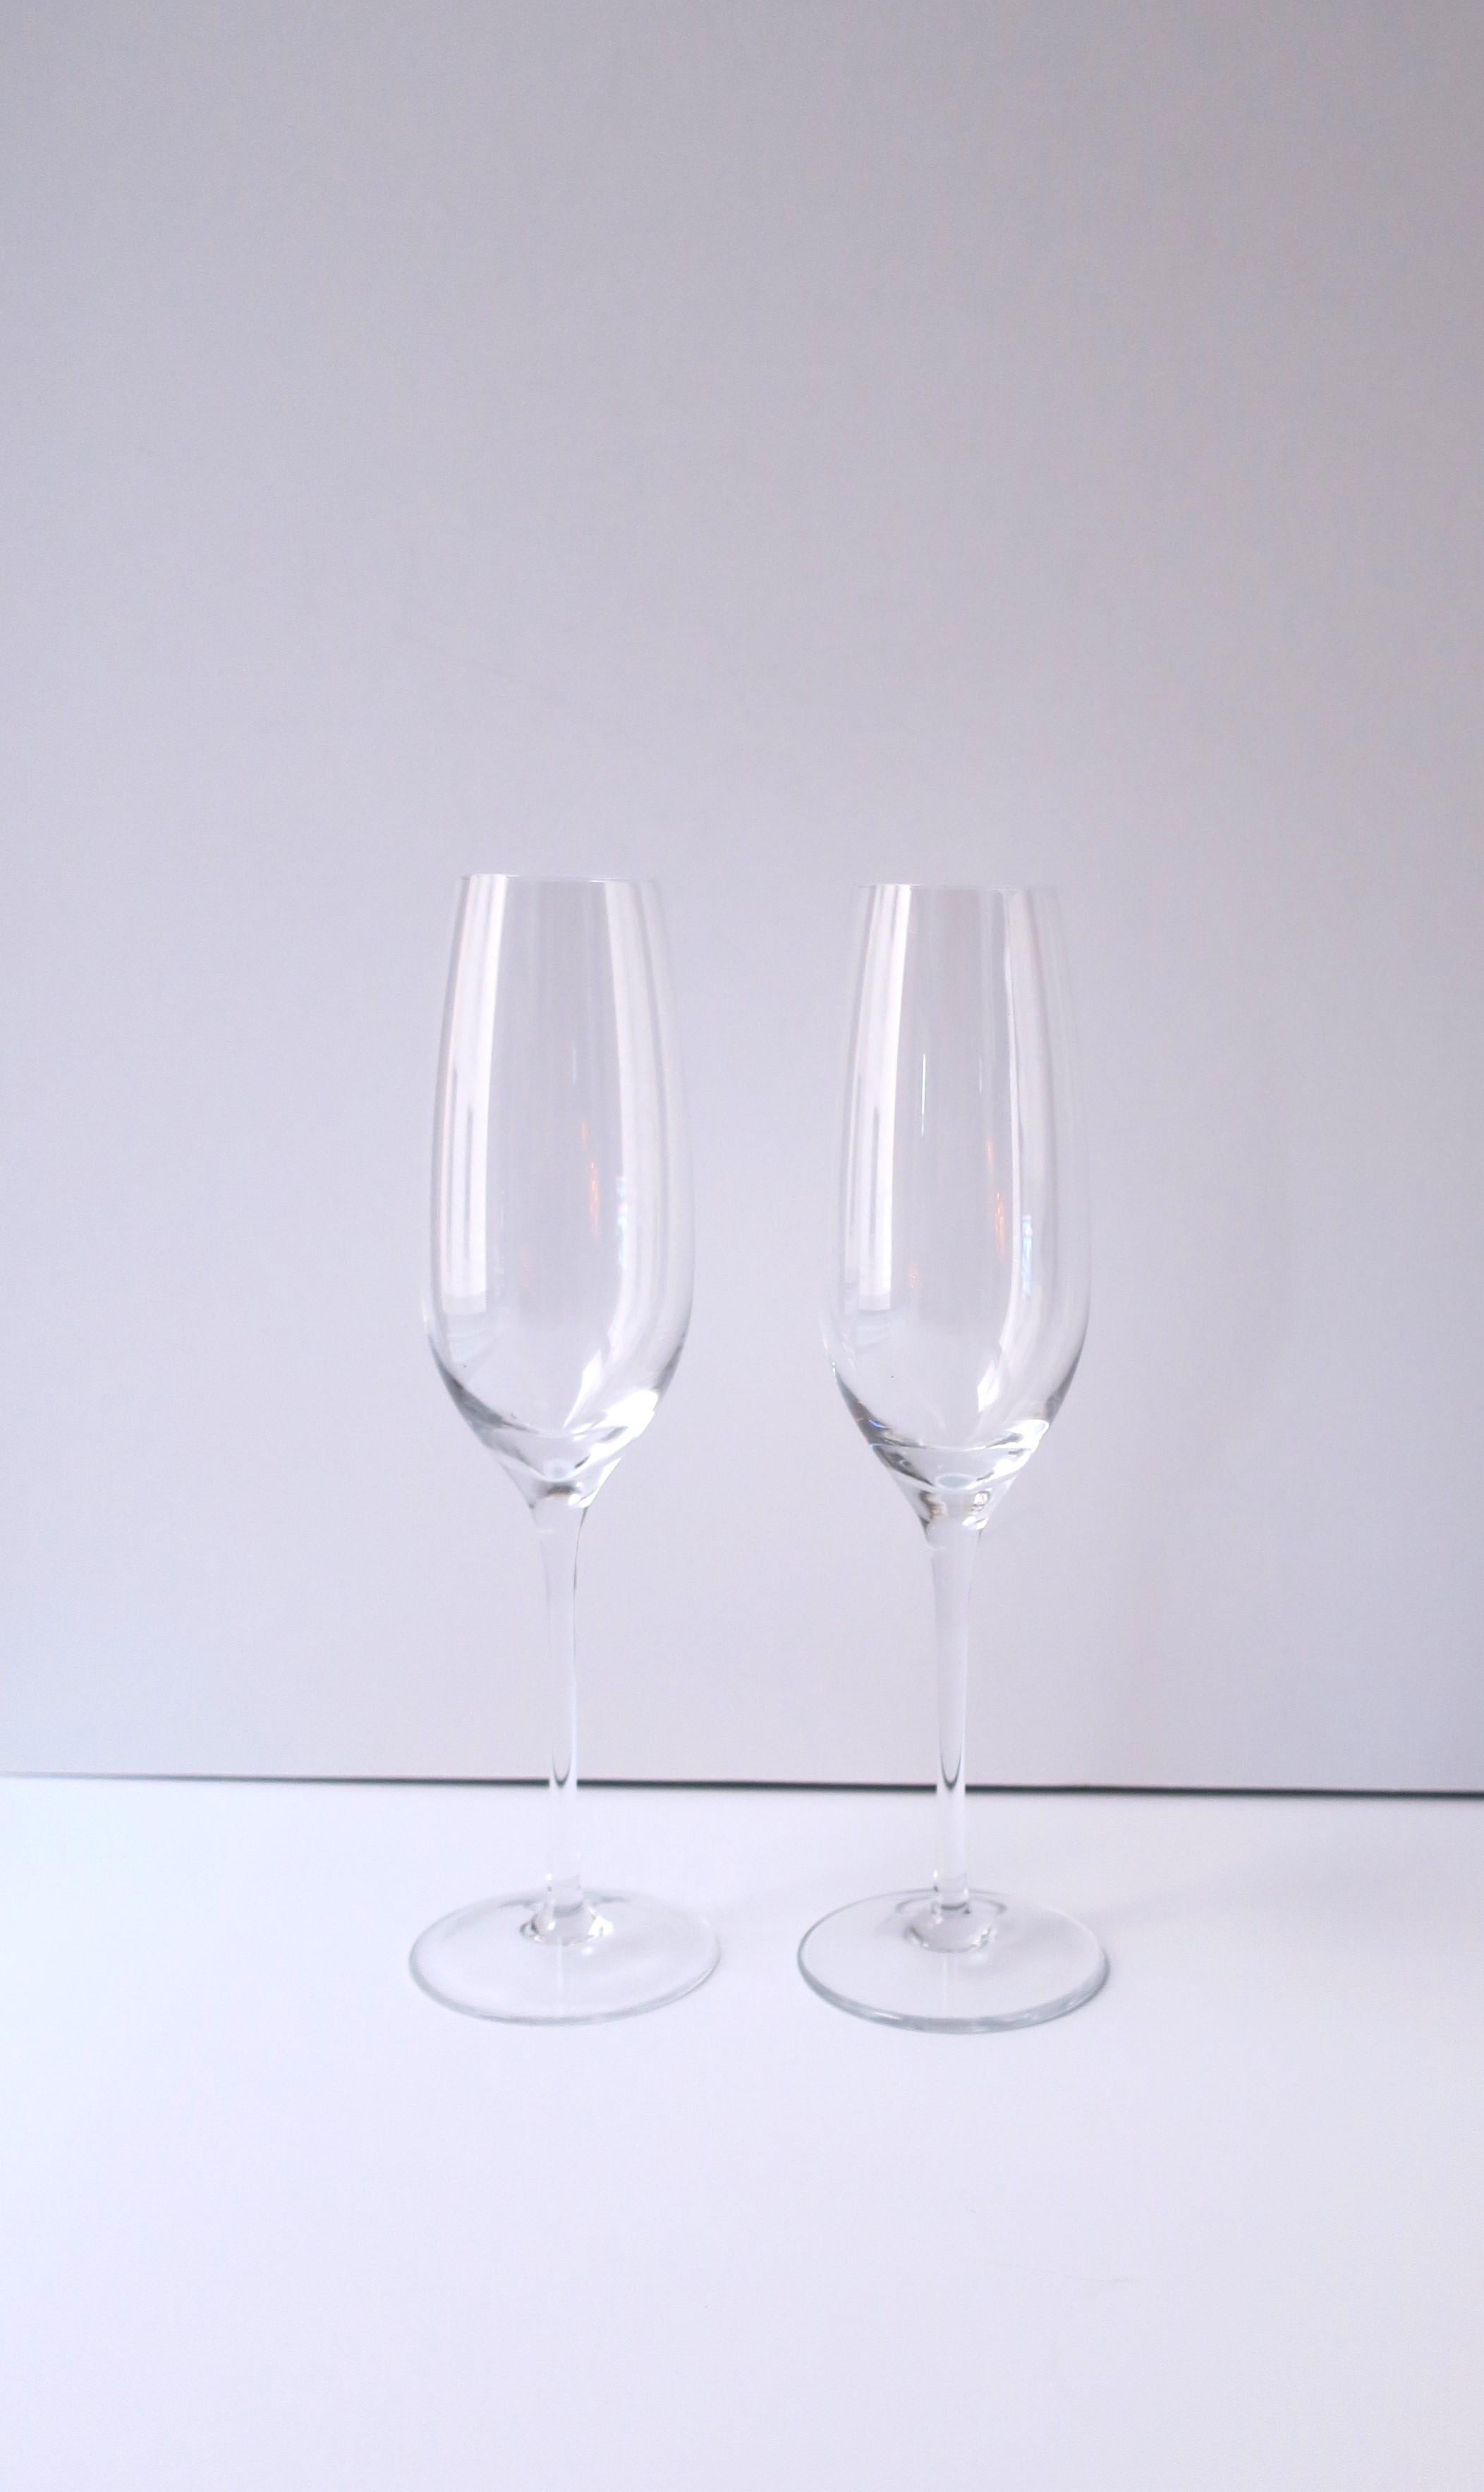 A pair of Tiffany & Co. Champagne flutes/glasses, circa late-20th century. A beautiful pair from luxury American company Tiffany & Co. Markers' mark on bottom of both 'Tiffany & Co.', as shown in last two images A great set for everyday use or